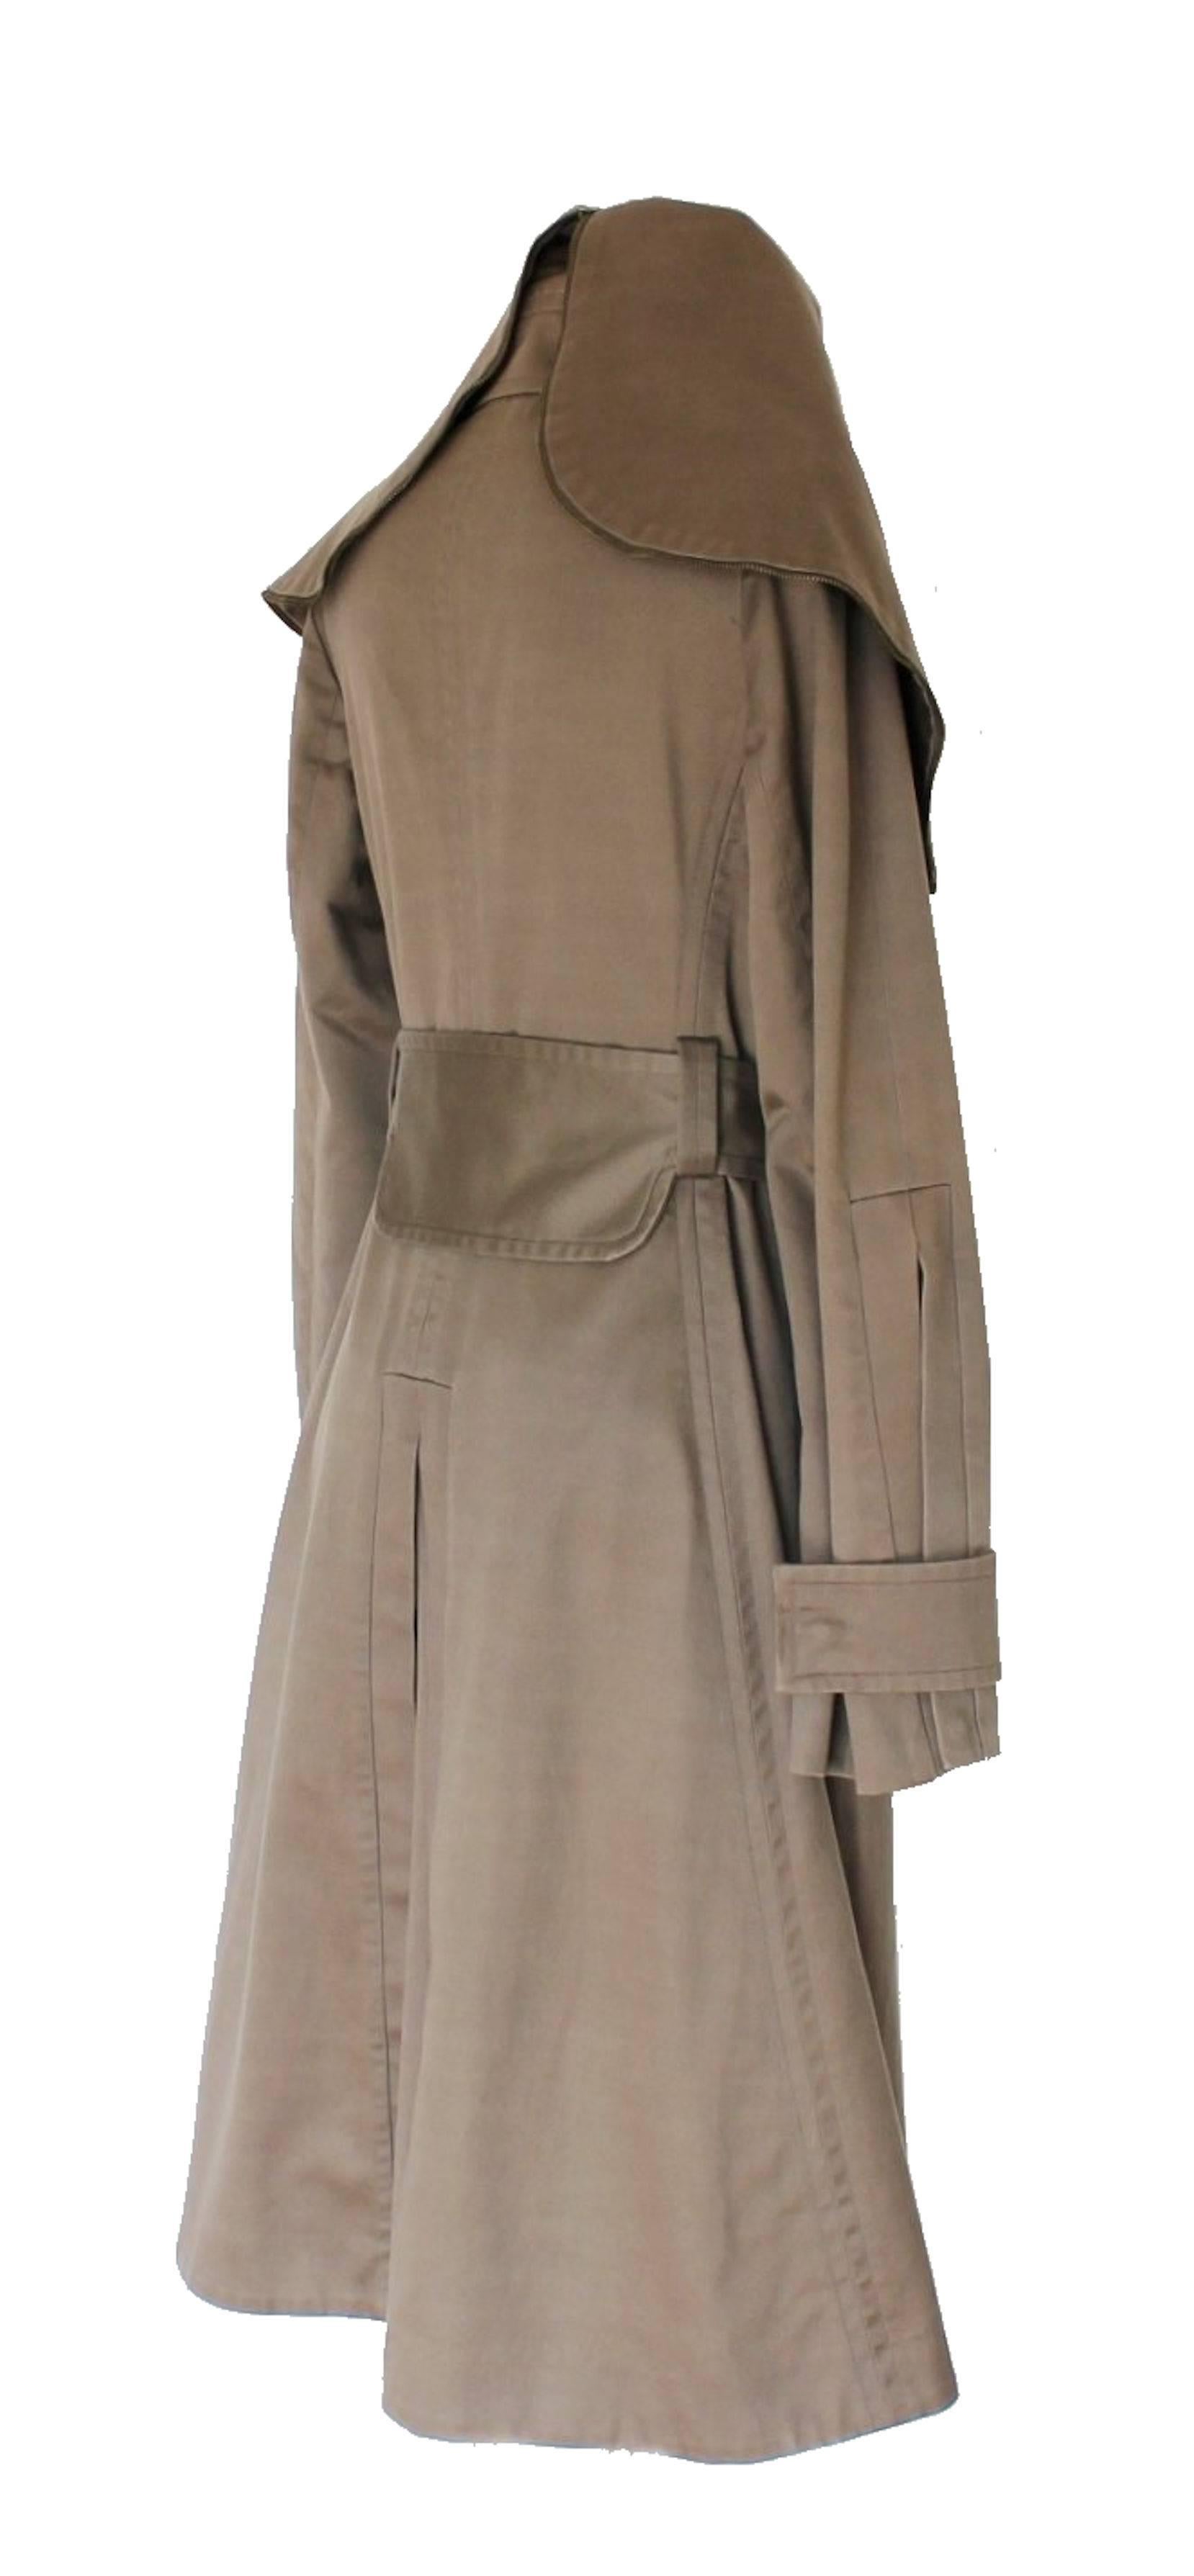 RARE COLLECTOR'S ITEM

GUCCI

GORGEOUS DISTRESSED MUD OLIVE HOODED COAT WITH BELT

BY TOM FORD

FOR HIS FW 2003 COLLECTION FOR THE HOUSE OF GUCCI

ULTRAFAMOUS

FALL 2003 RUNWAY COLLECTION

DETAILS:

    Beautiful GUCCI by Tom Ford